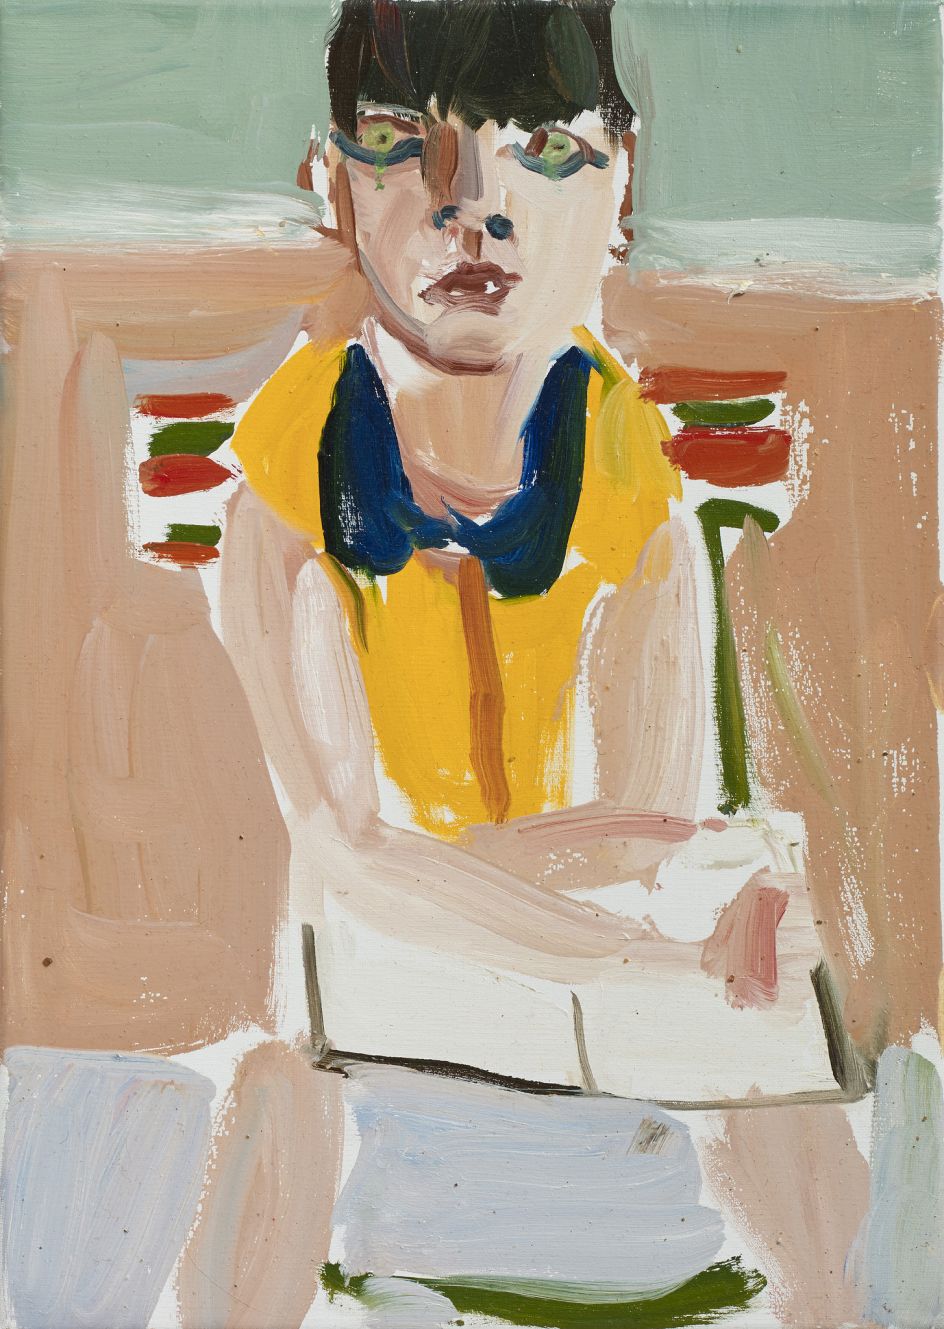 Esme in a Yellow Dress, 2016 Oil on canvas 35.6 x 25.2 x 2.1 cm 14 1/8 x 9 7/8 x 7/8 in  © Chantal Joffe  Courtesy the artist and Victoria Miro, London / Venice